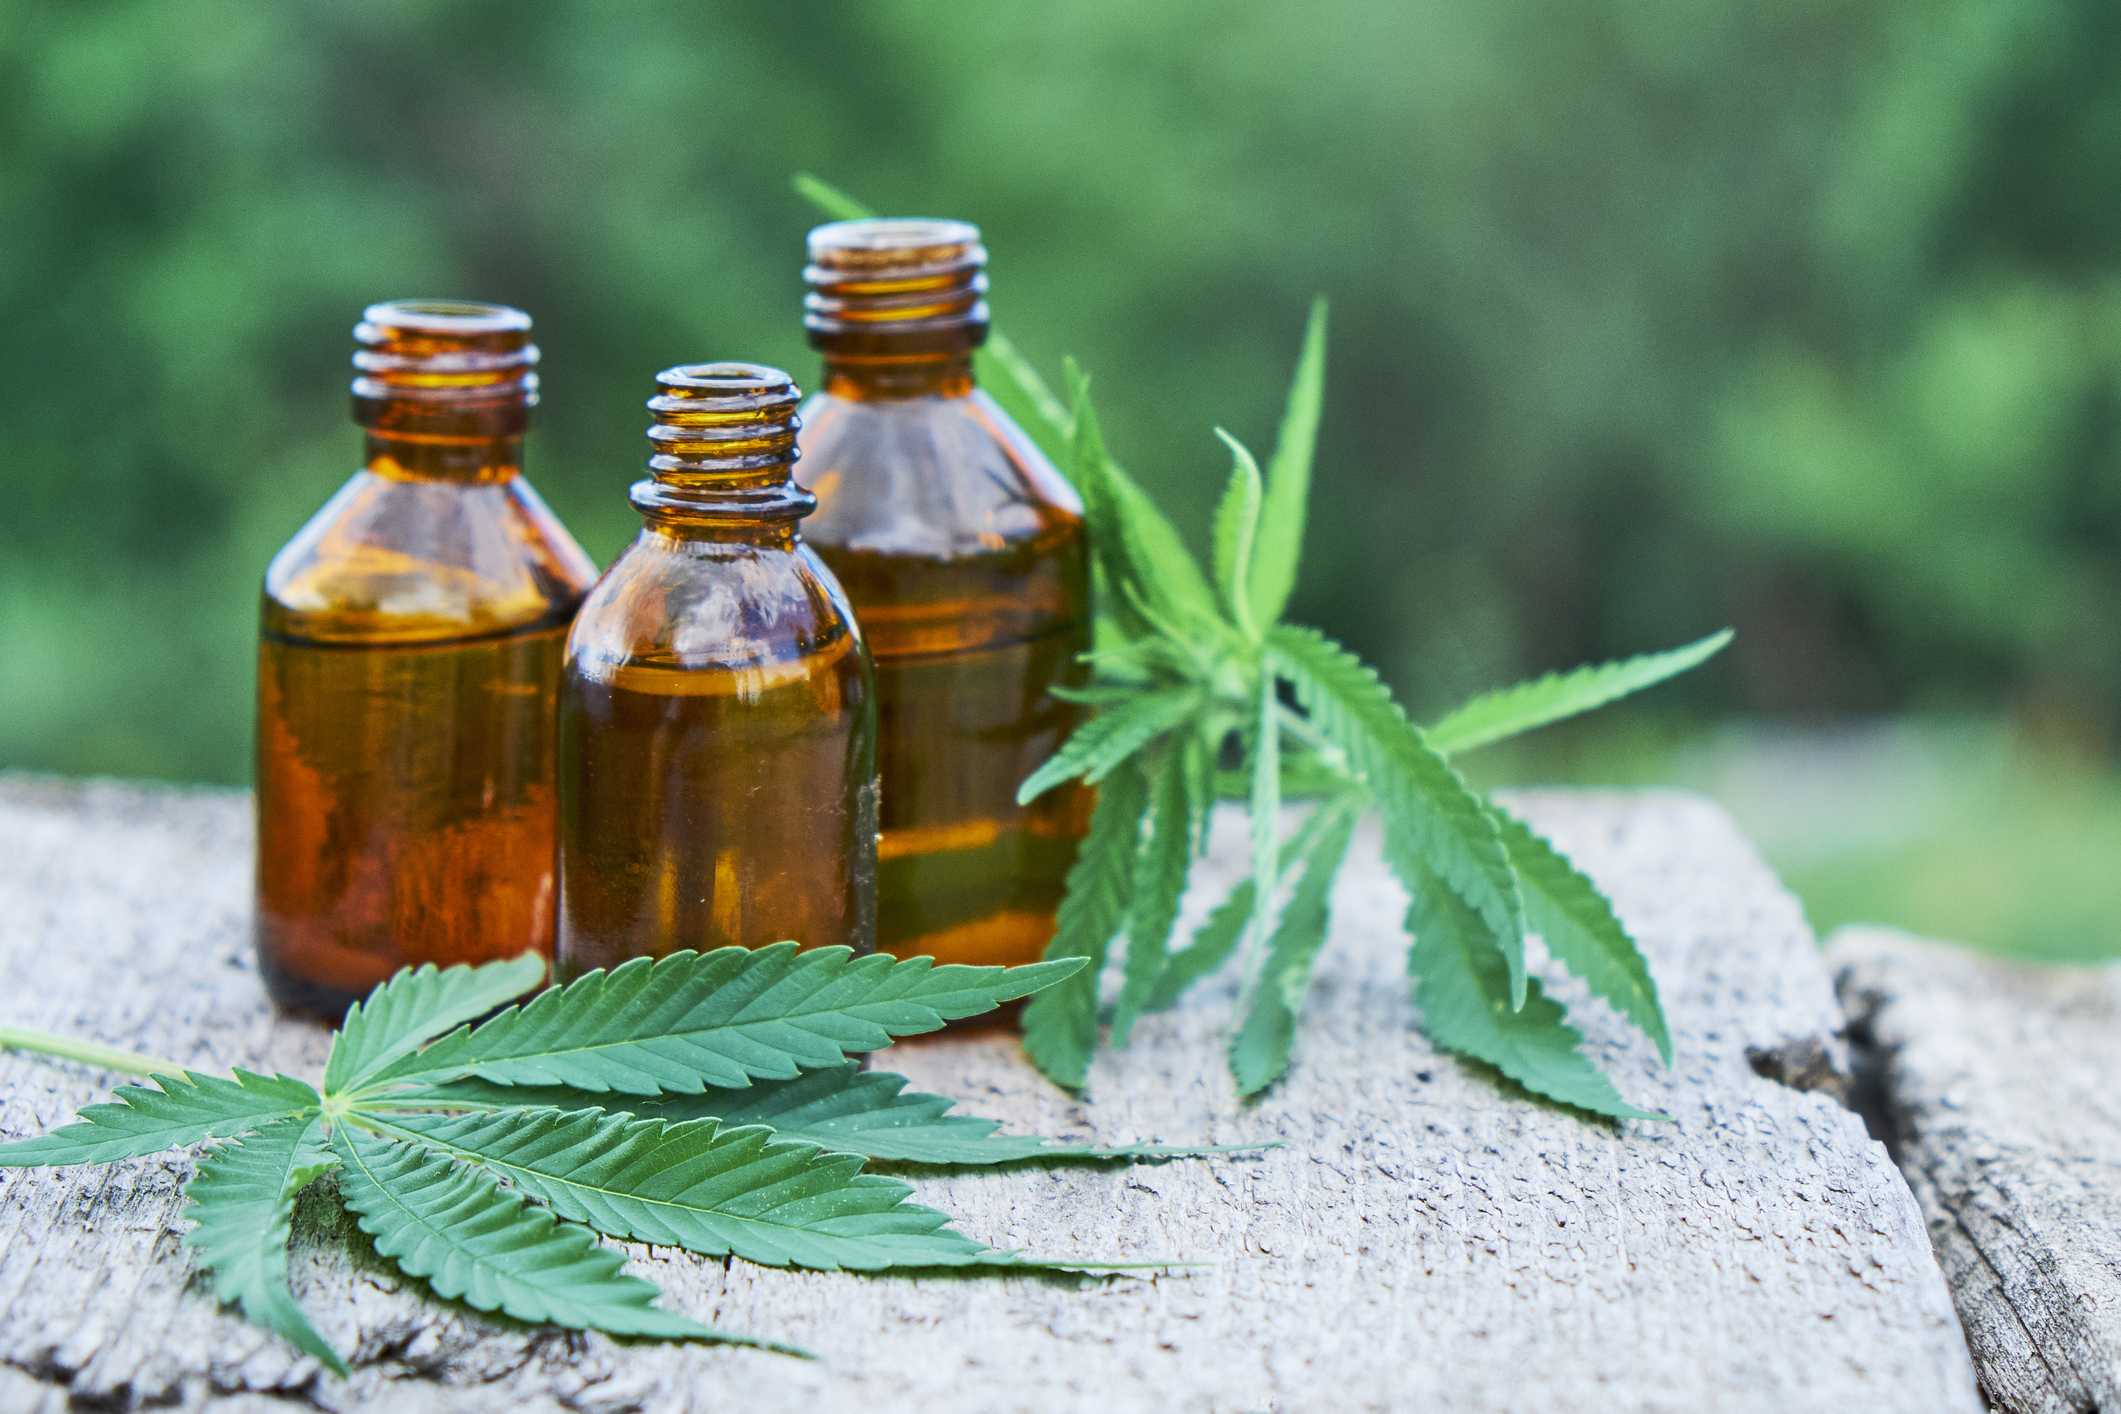 What To Add To Cbd Oil For Taste - Cbd|Oil|Cannabidiol|Products|View|Abstract|Effects|Hemp|Cannabis|Product|Thc|Pain|People|Health|Body|Plant|Cannabinoids|Medications|Oils|Drug|Benefits|System|Study|Marijuana|Anxiety|Side|Research|Effect|Liver|Quality|Treatment|Studies|Epilepsy|Symptoms|Gummies|Compounds|Dose|Time|Inflammation|Bottle|Cbd Oil|View Abstract|Side Effects|Cbd Products|Endocannabinoid System|Multiple Sclerosis|Cbd Oils|Cbd Gummies|Cannabis Plant|Hemp Oil|Cbd Product|Hemp Plant|United States|Cytochrome P450|Many People|Chronic Pain|Nuleaf Naturals|Royal Cbd|Full-Spectrum Cbd Oil|Drug Administration|Cbd Oil Products|Medical Marijuana|Drug Test|Heavy Metals|Clinical Trial|Clinical Trials|Cbd Oil Side|Rating Highlights|Wide Variety|Animal Studies